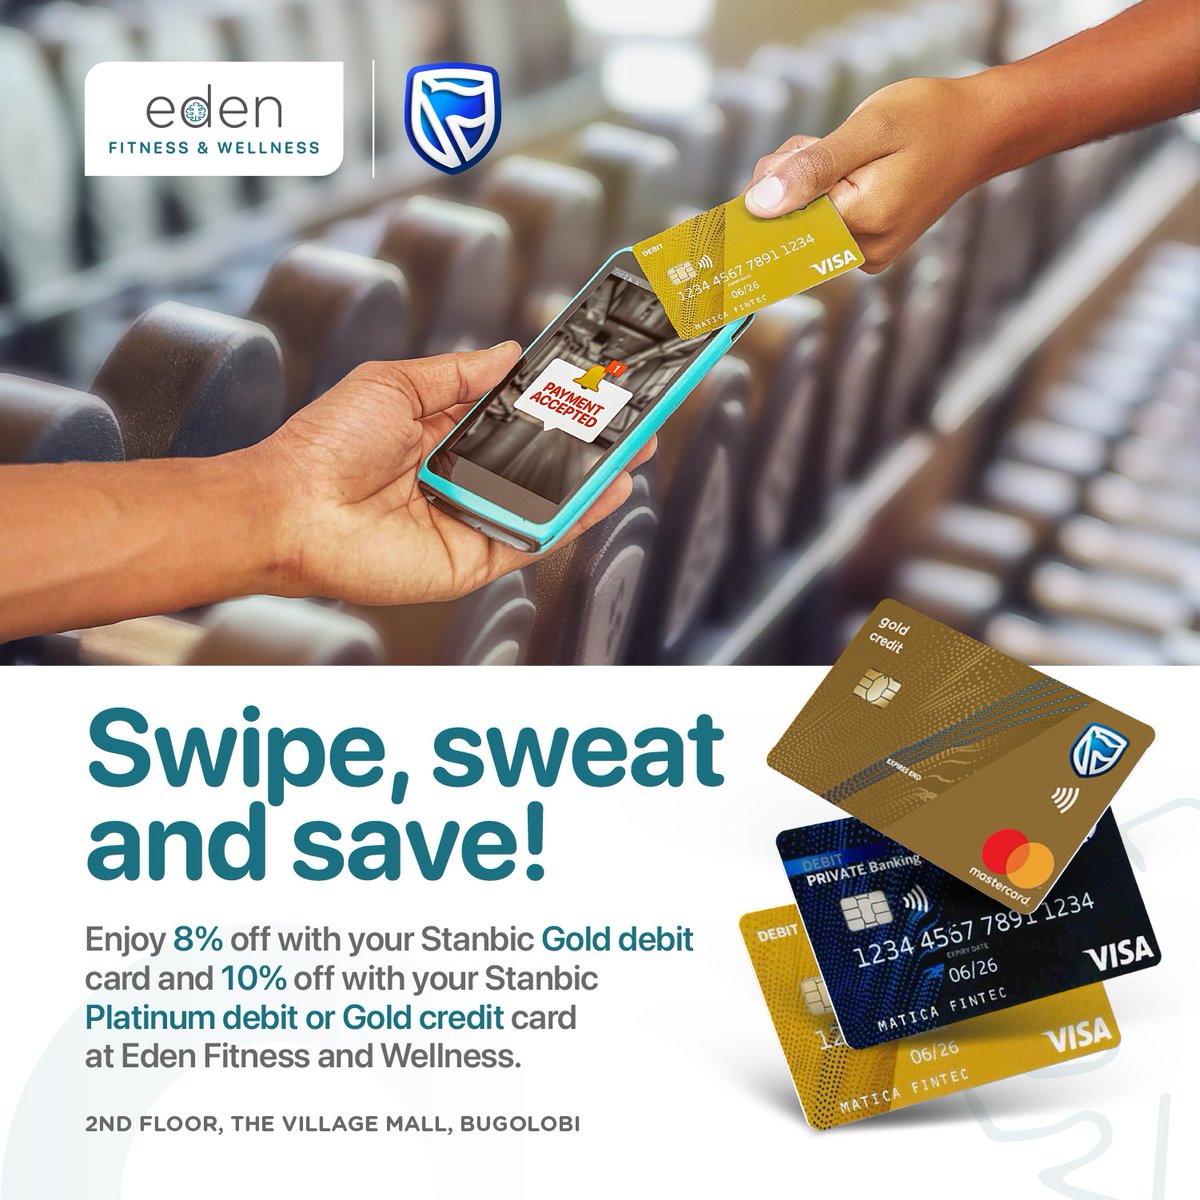 Use your @stanbicug debit or credit card at Eden Fitness & Wellness and unlock exclusive discounts. Visit us today!
#Stanbicbank #edengym 
#discounts #NewYearBetterYou 
#kampala #uganda